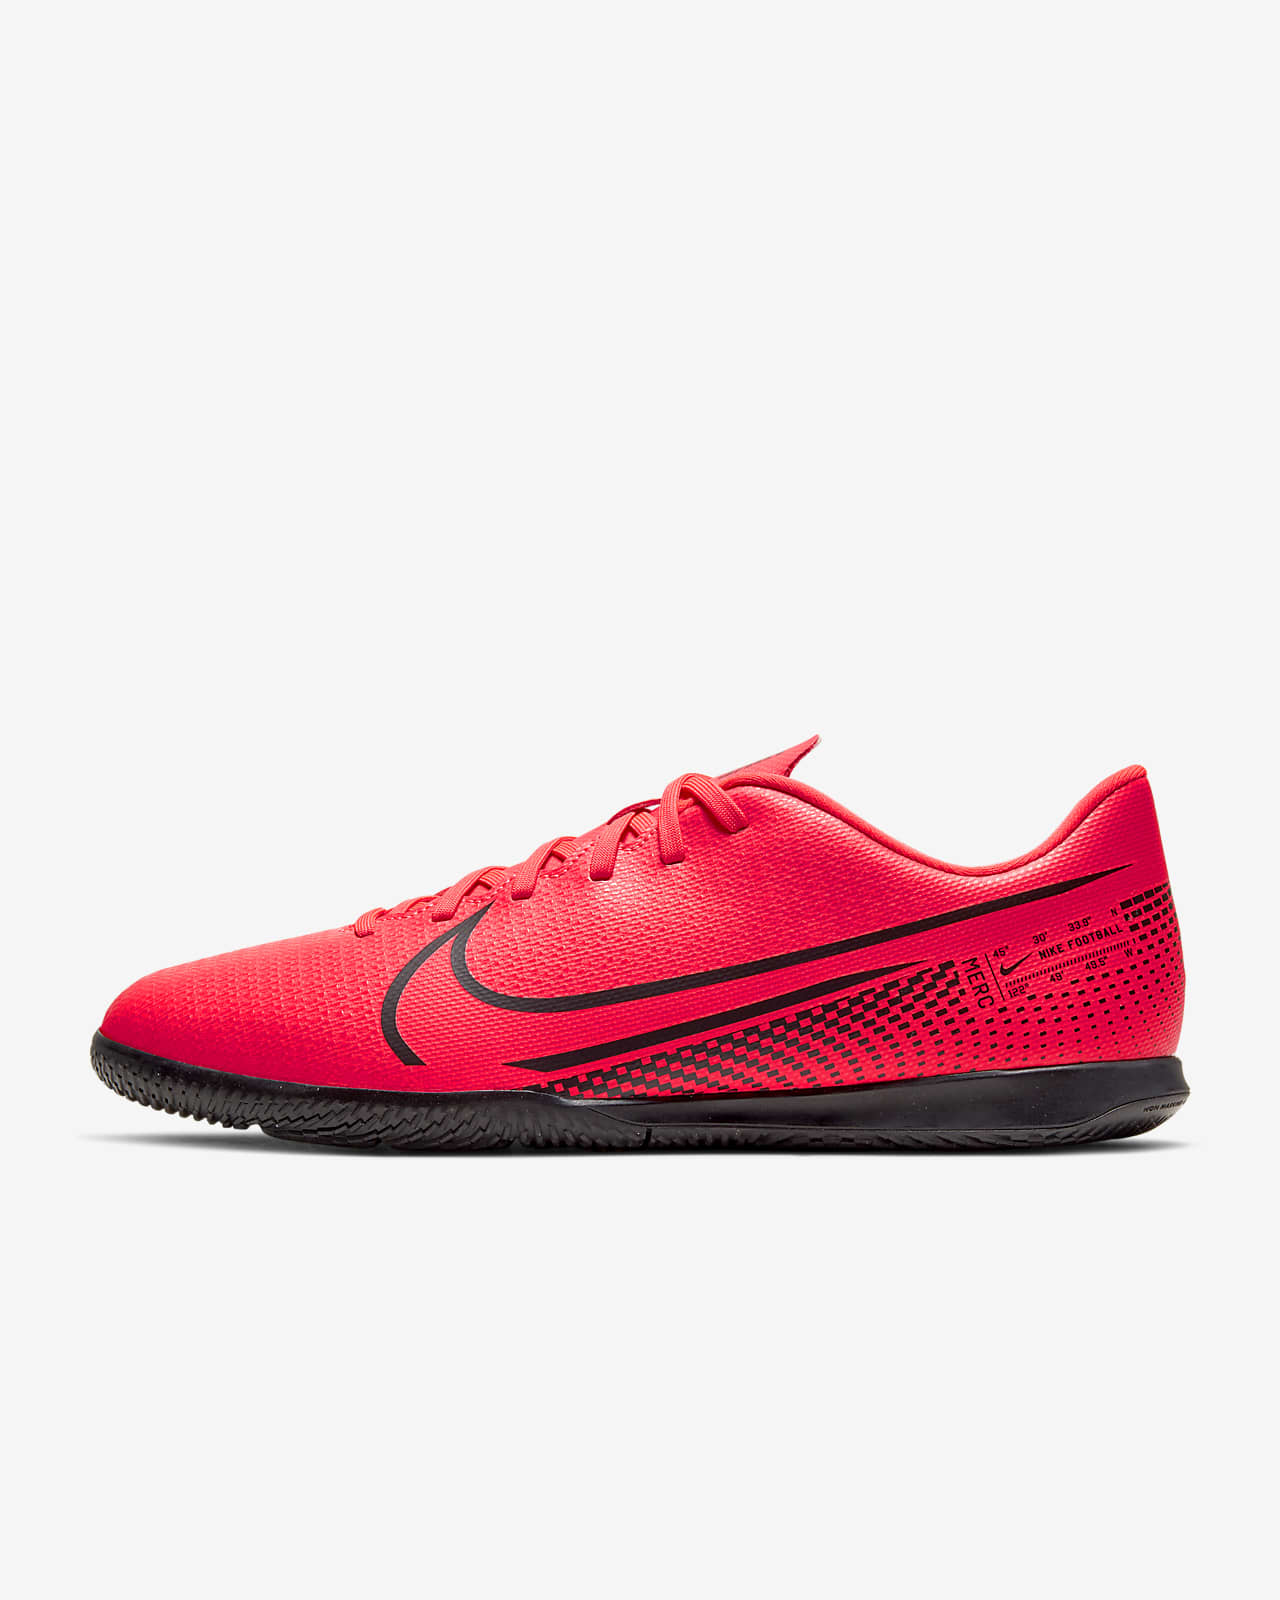 nike id indoor soccer shoes